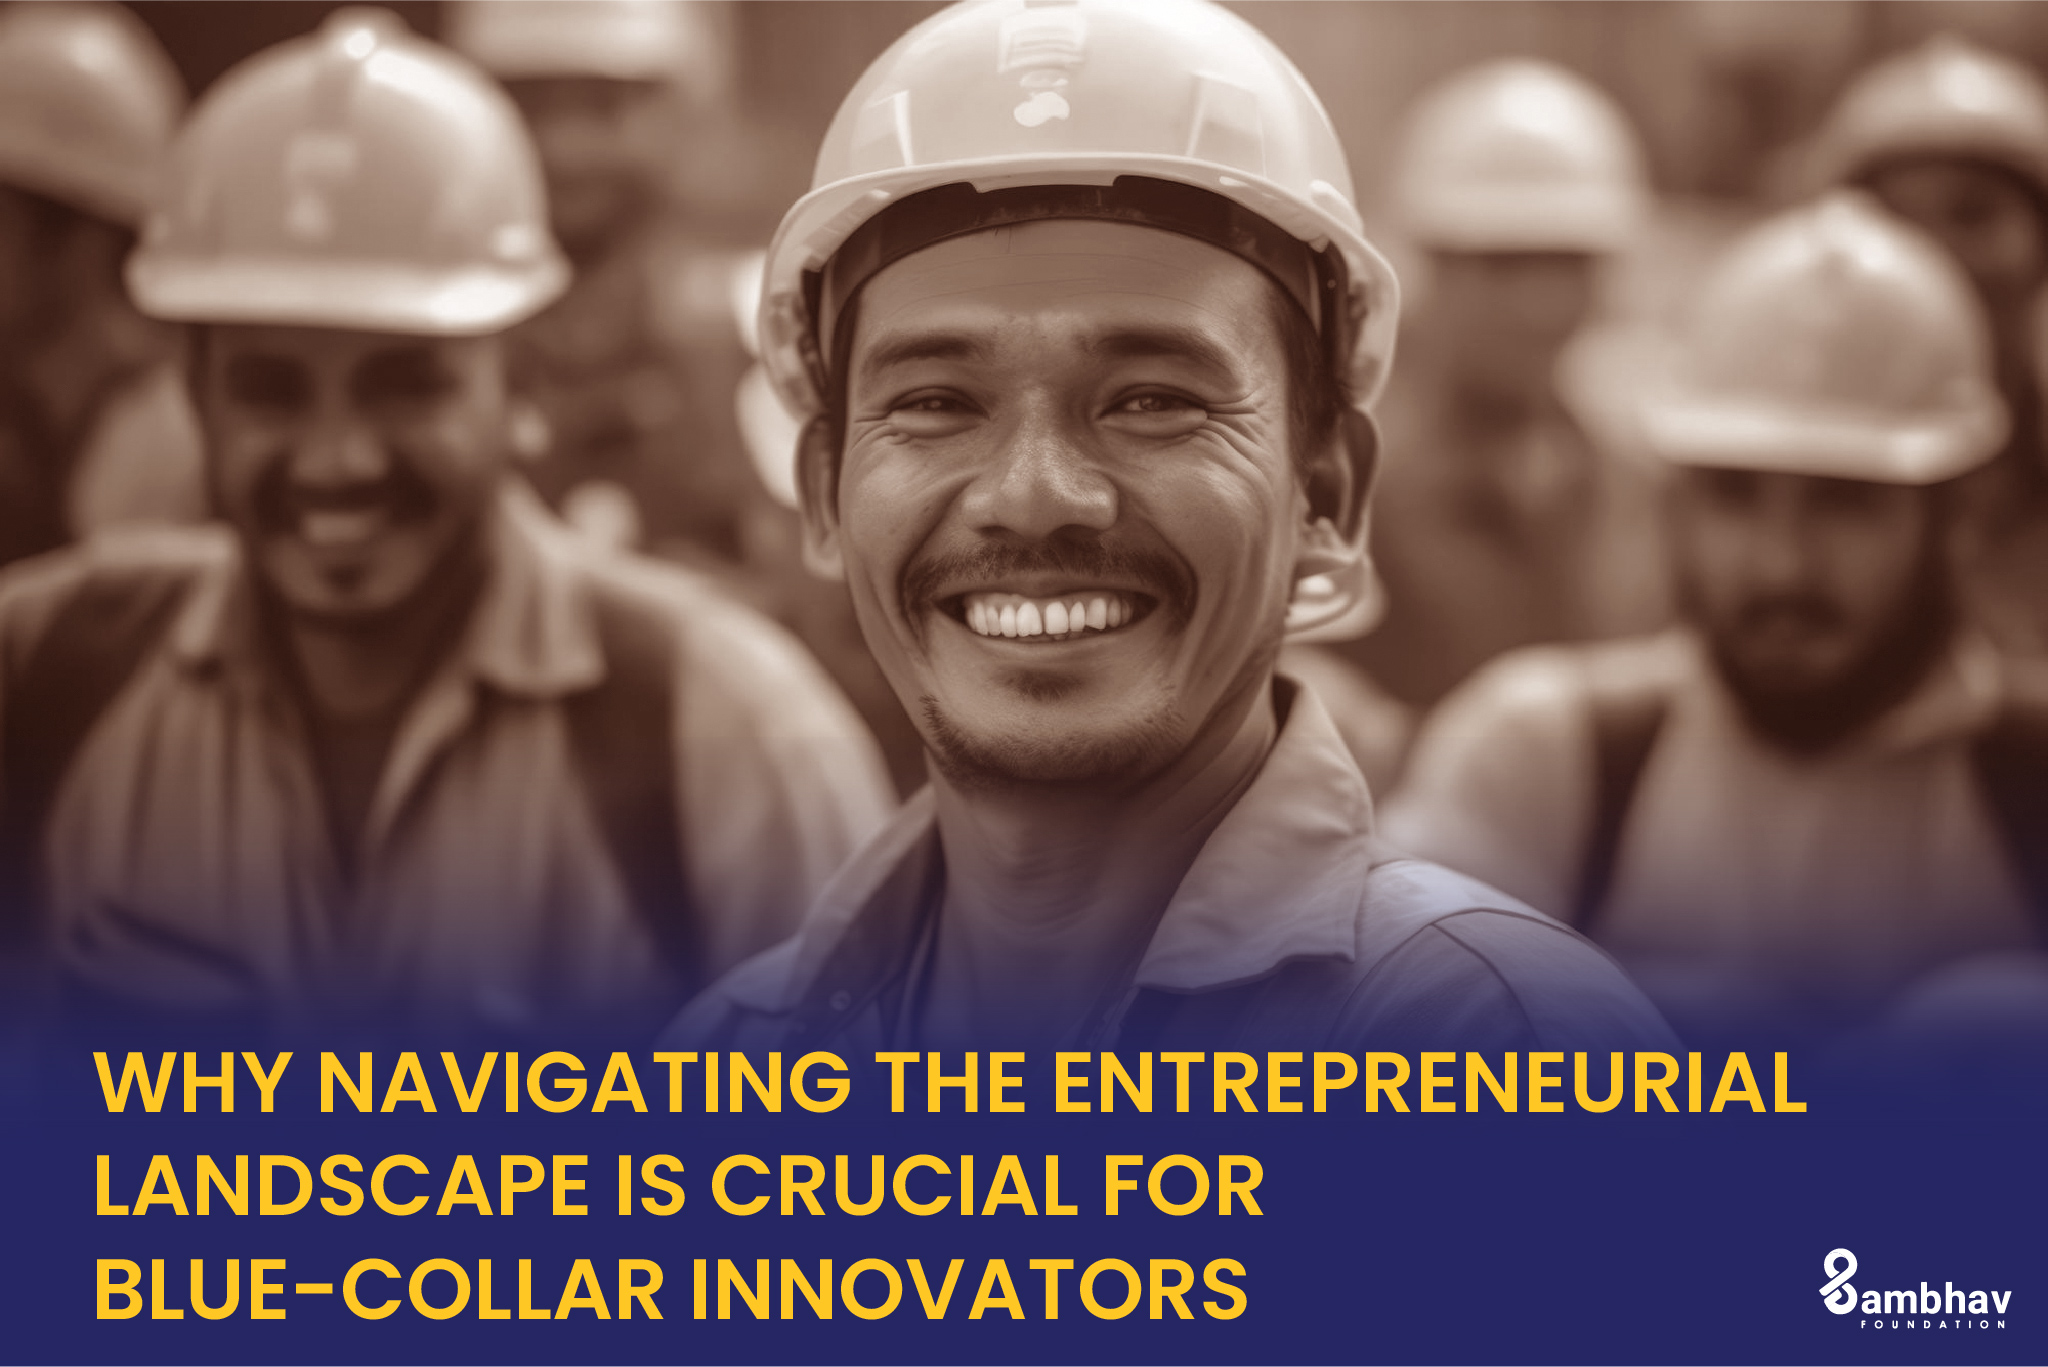 Why Navigating the Entrepreneurial Landscape is Crucial for Blue-Collar Innovators